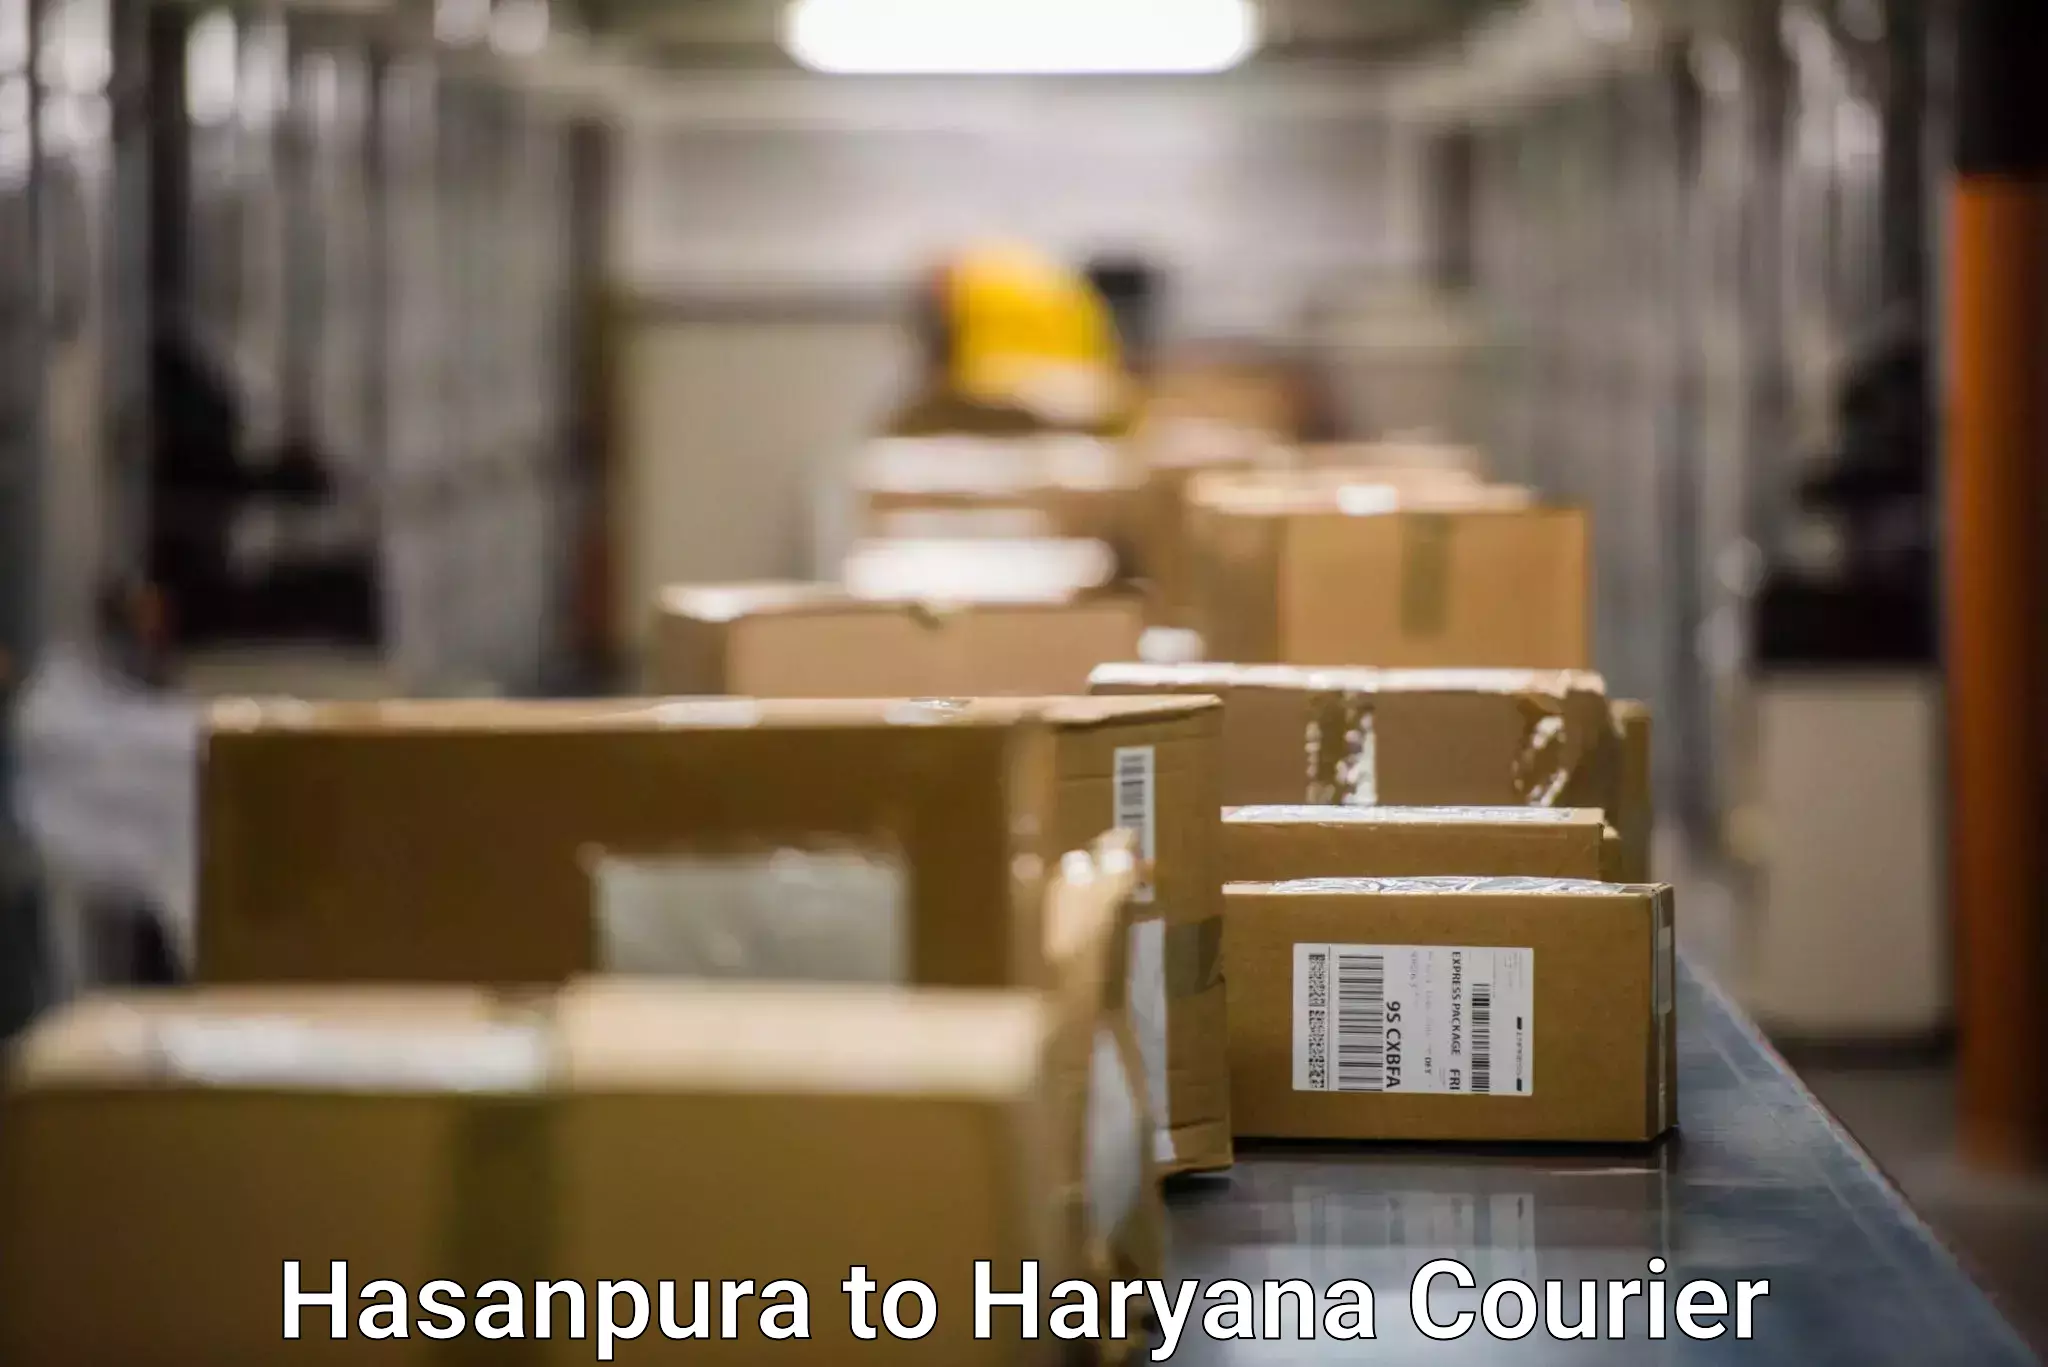 Package delivery network Hasanpura to Pinjore